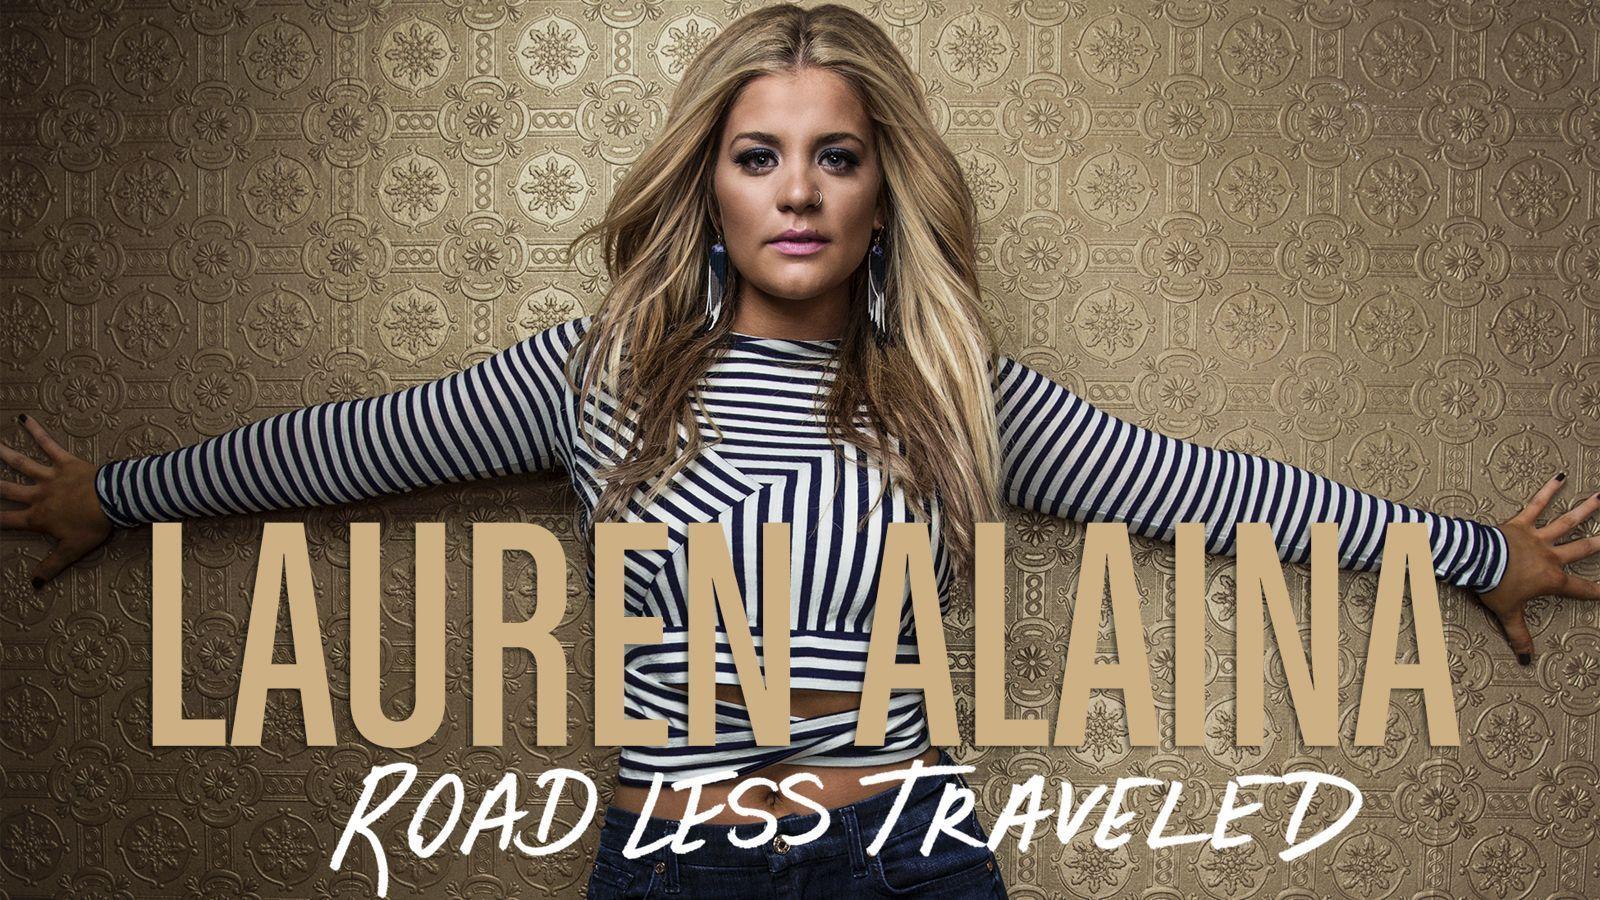 Lauren Alaina Performs TV Debut Of Road Less Traveled On